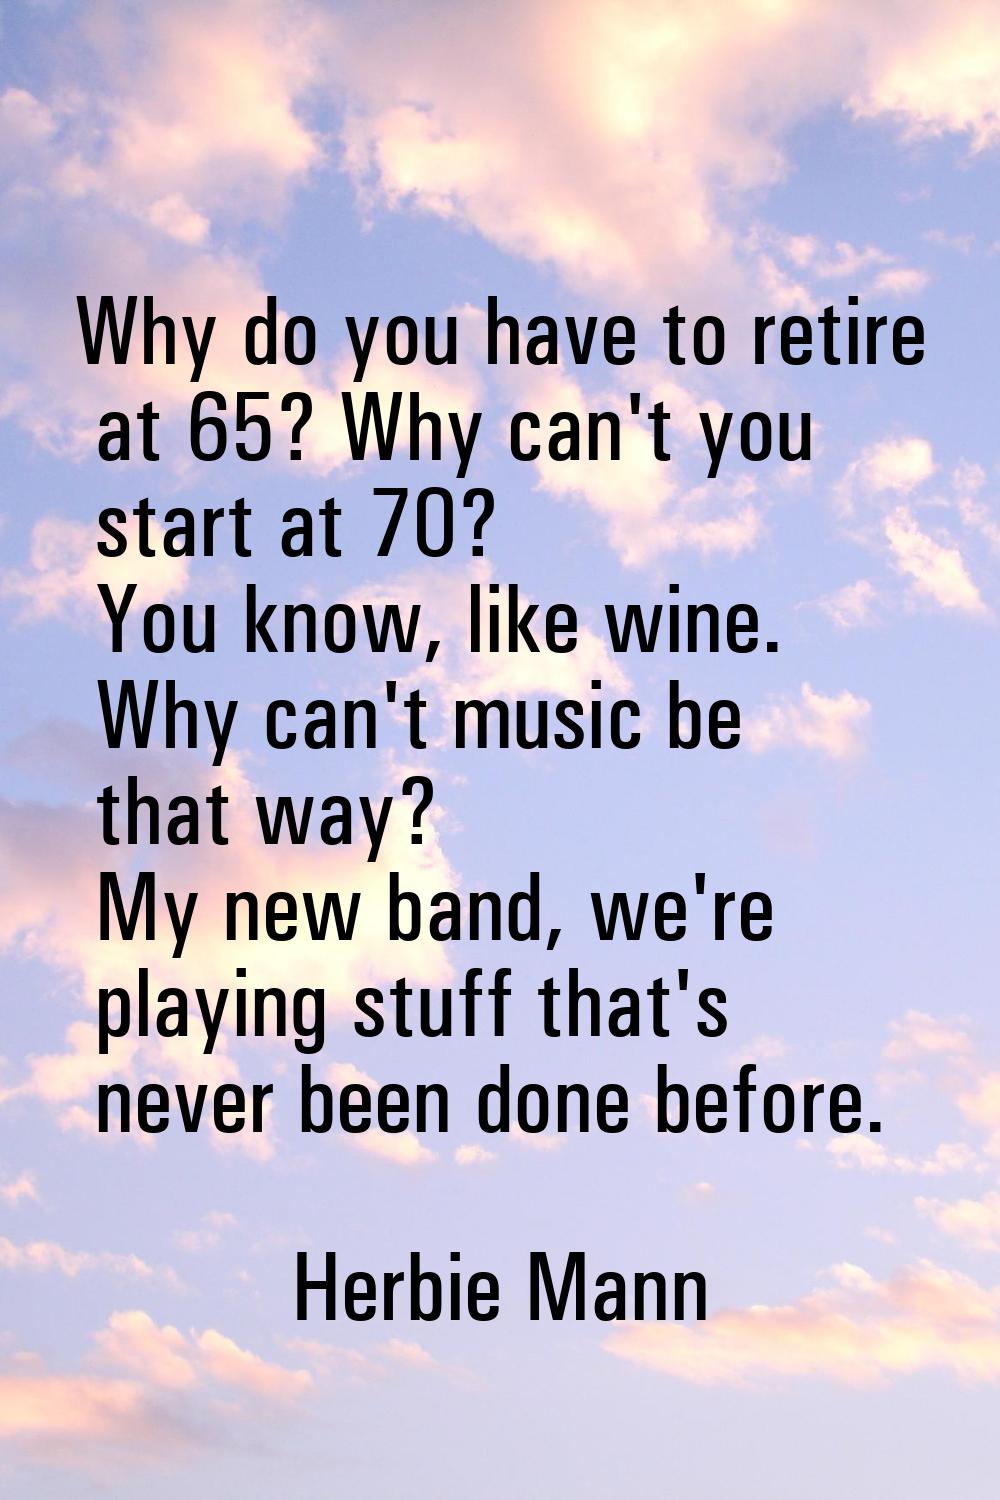 Why do you have to retire at 65? Why can't you start at 70? You know, like wine. Why can't music be